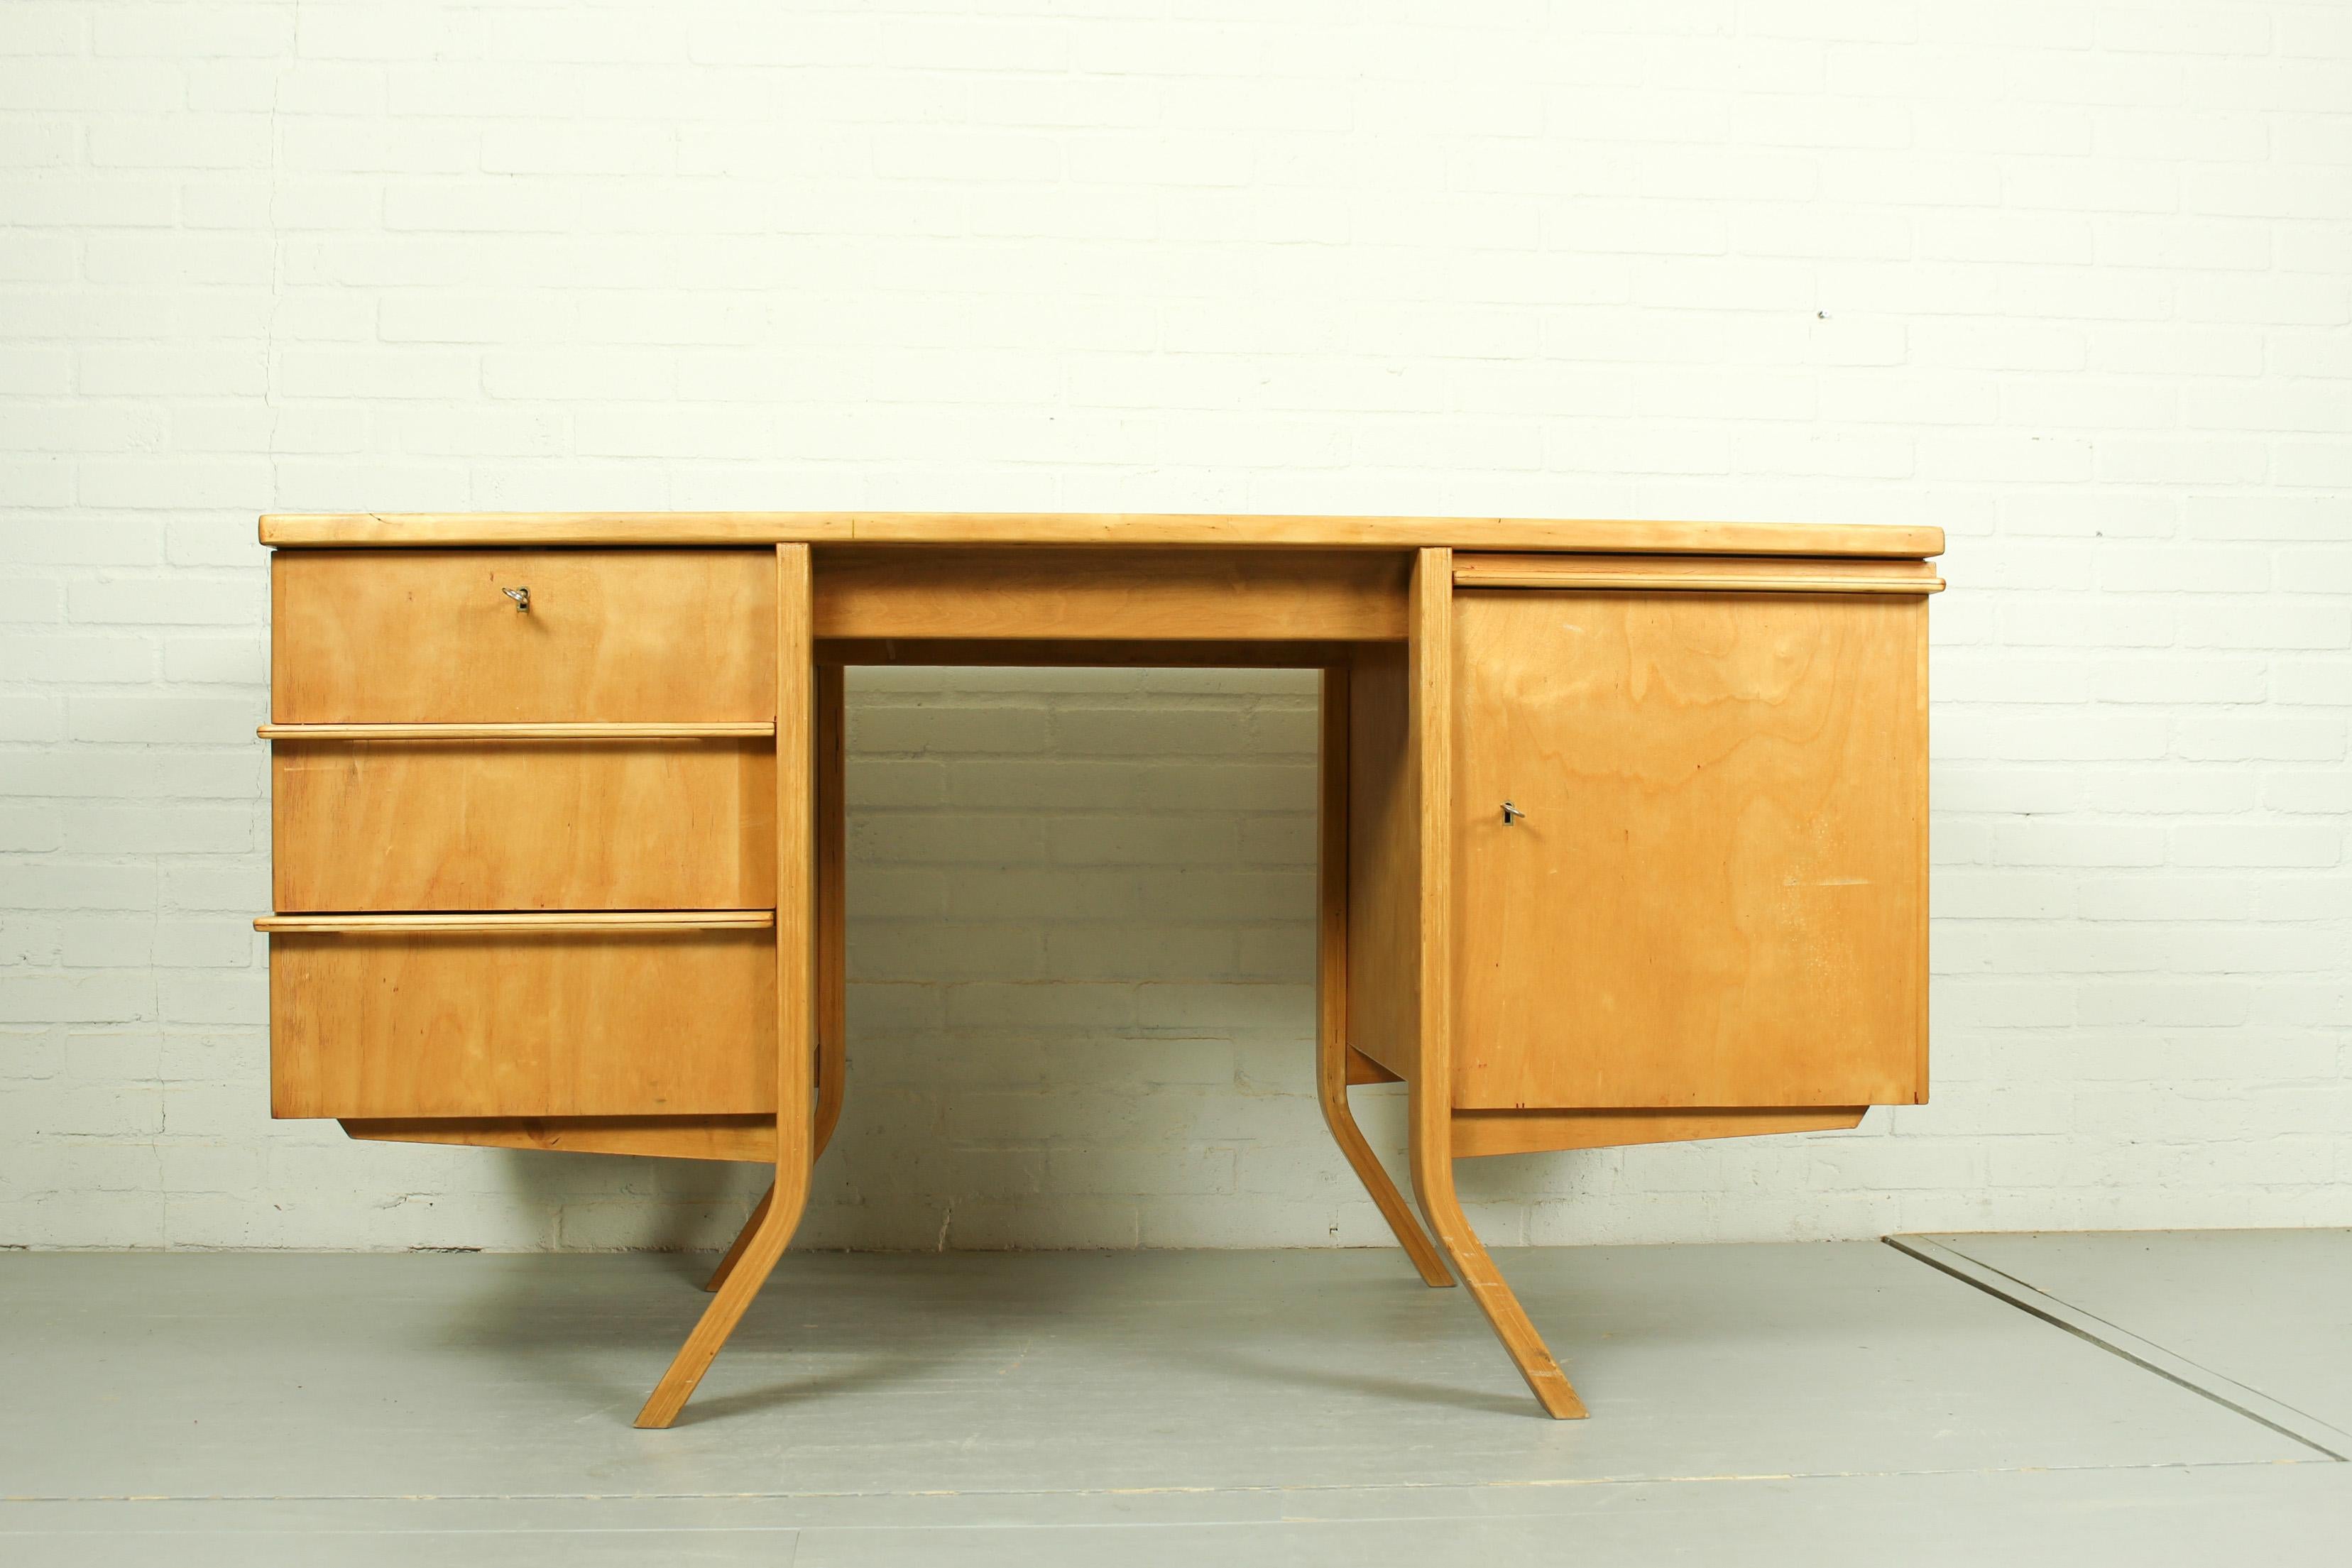 Beautiful writing desk designed by Cees Braakman for Pastoe in the early 50s. This EB04 desk is part of the ‘Birch Series’. It has 3 drawers on the left and on the right a door with 2 shelves behind and an additional working leaf above. The door and